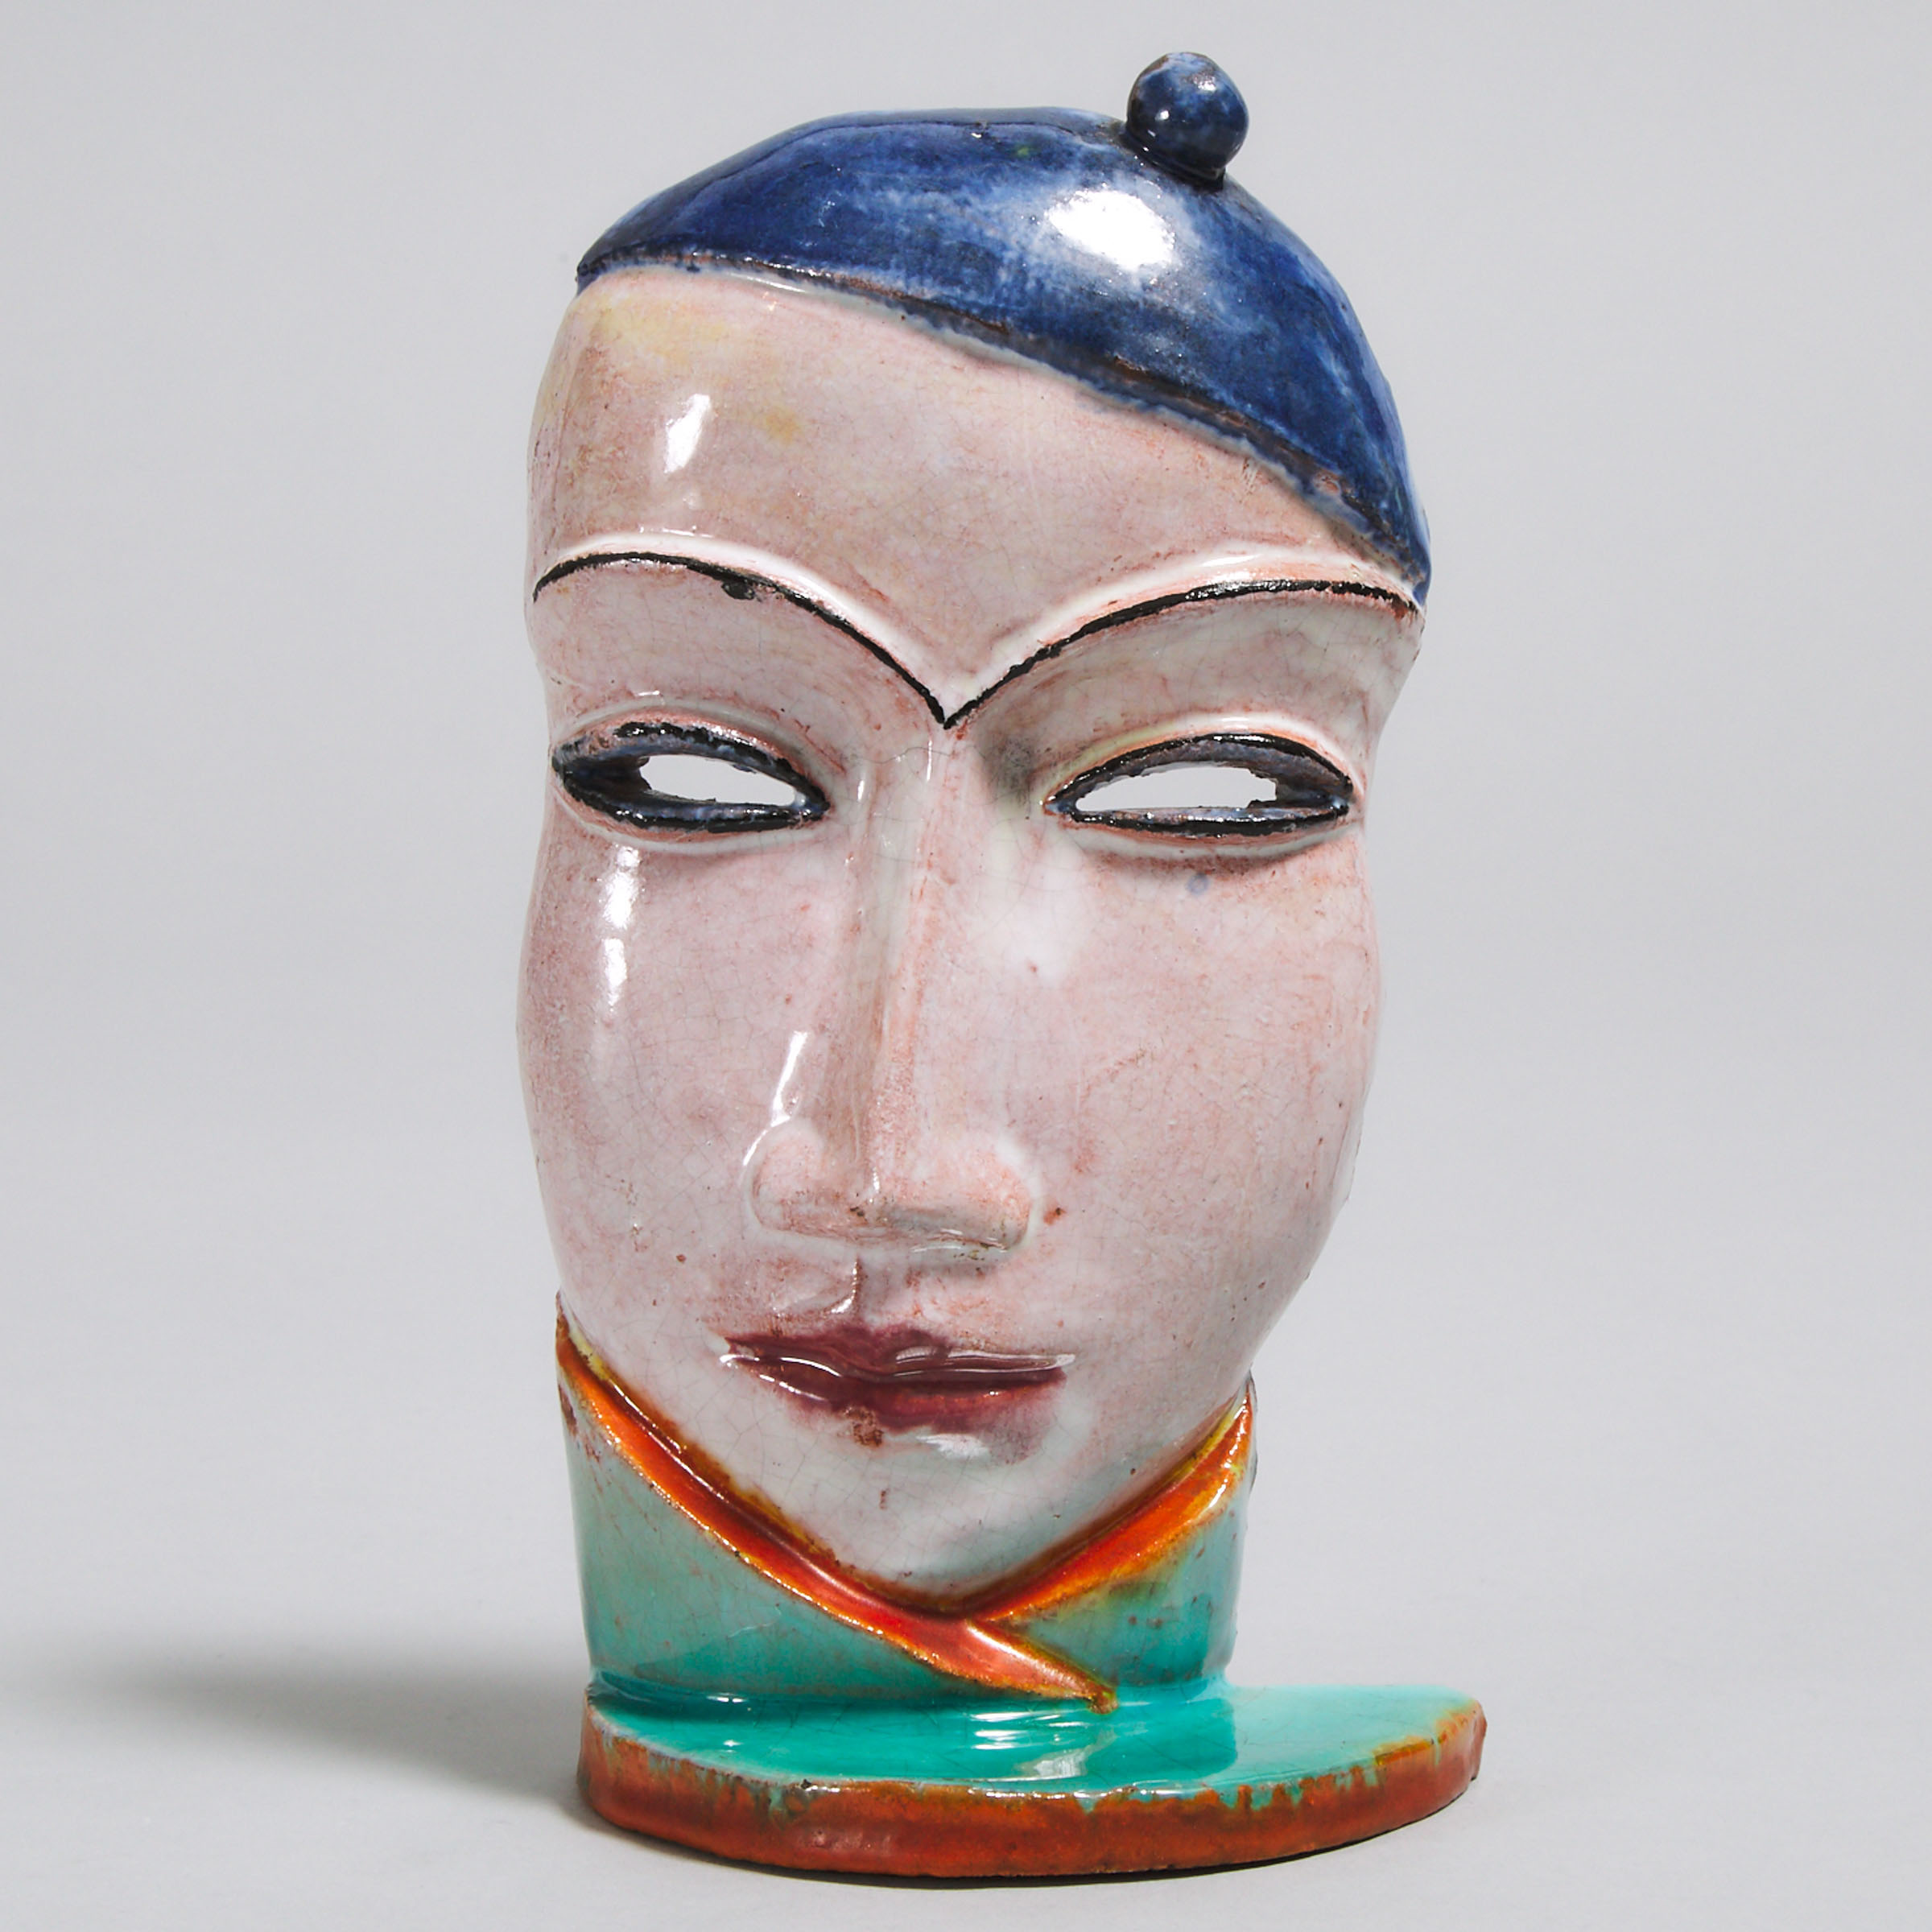 Austrian Goldscheider-Style Glazed Earthenware Mask of a Young Woman, early 20th century